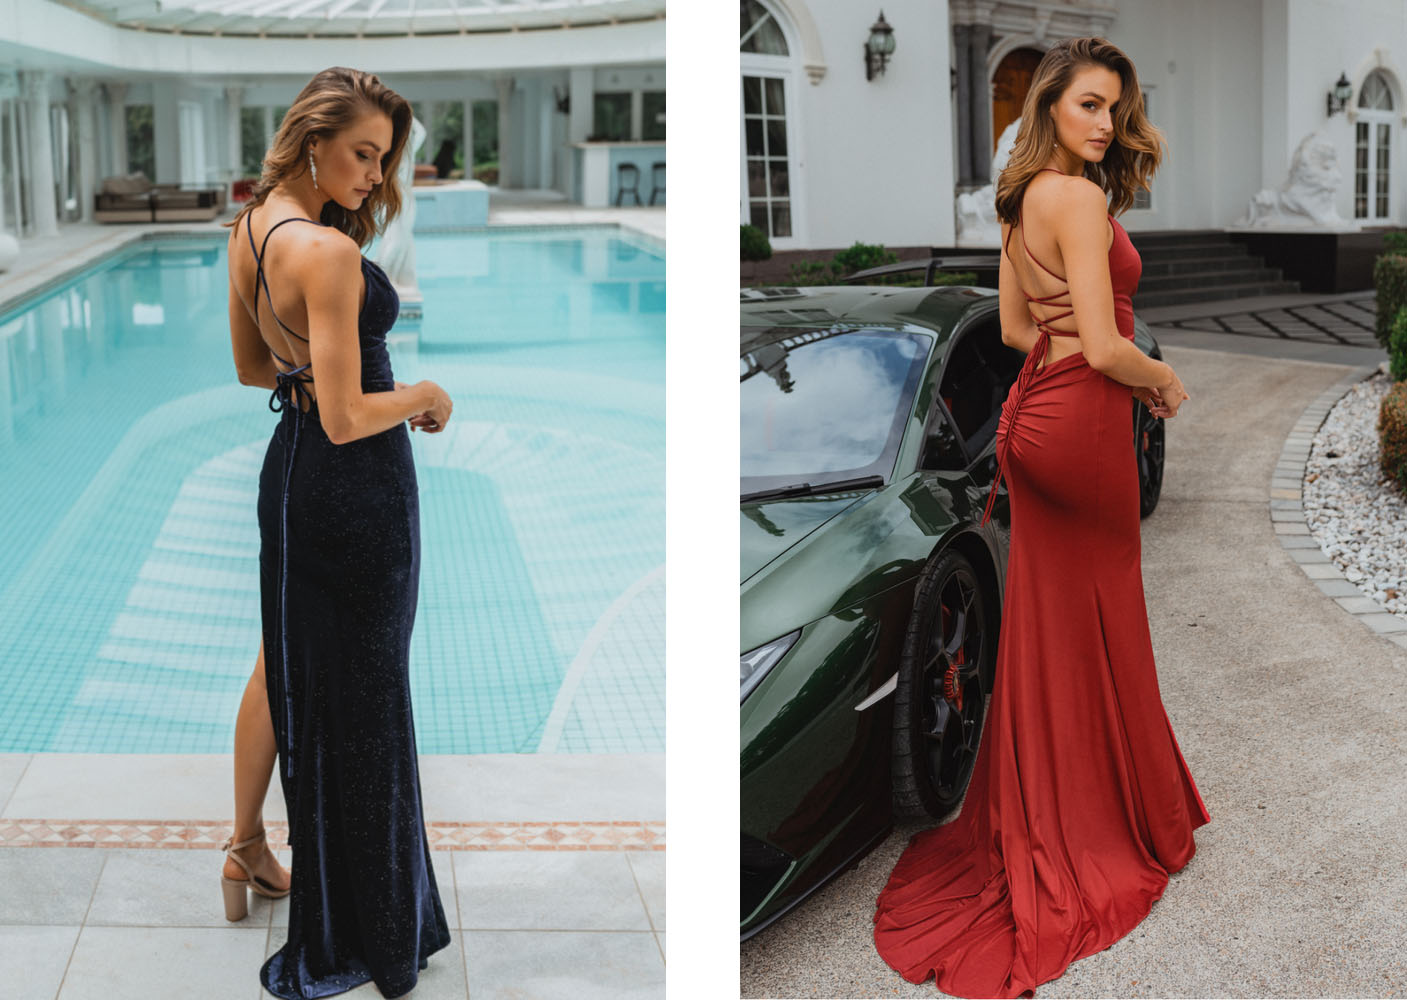 Backless Lace-Up Tie Back School Formal Evening Dresses Australia by Tania Olsen Designs at Fashionably Yours Bridal